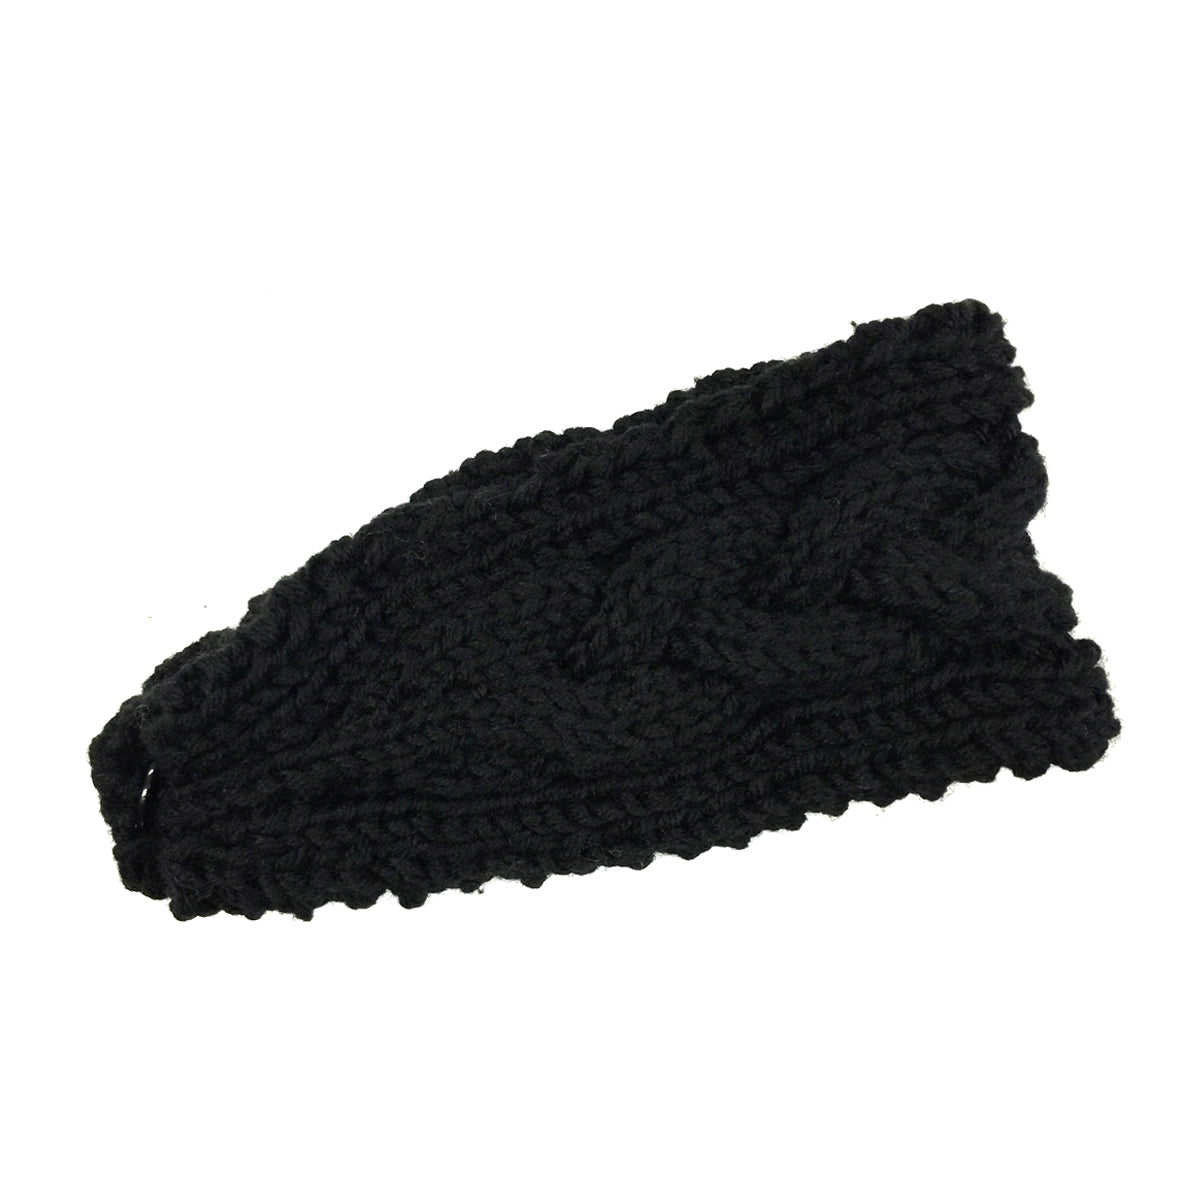 Wrapables Thick Cable Knit Headband for Teens and Girls